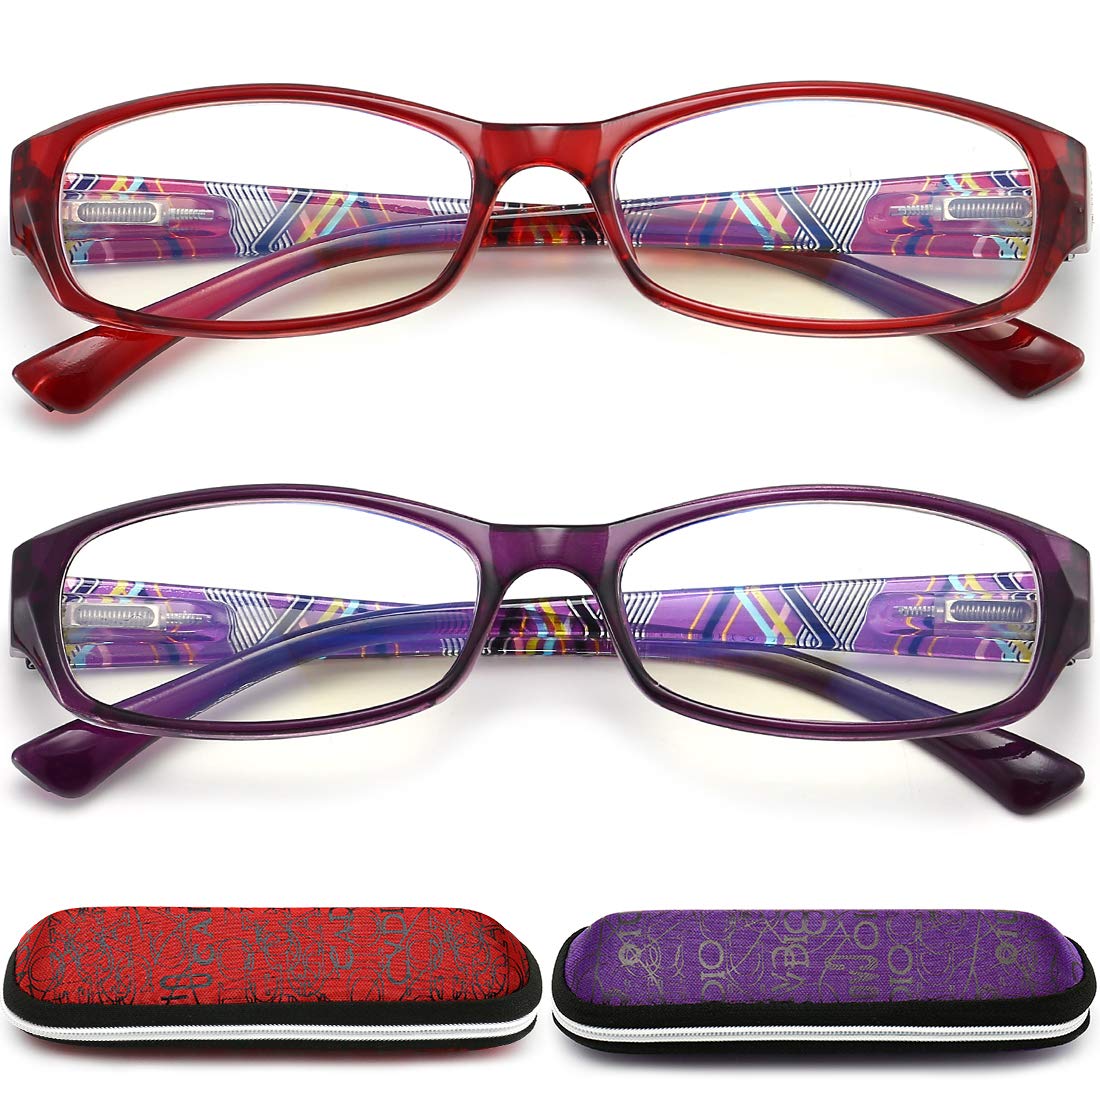 Blue Light Blocking Reading Glasses for Women - 2 Pack Blue Screen Computer Readers with Spring Magnification Eyeglasses 3.5 Red+purple 3.5 x